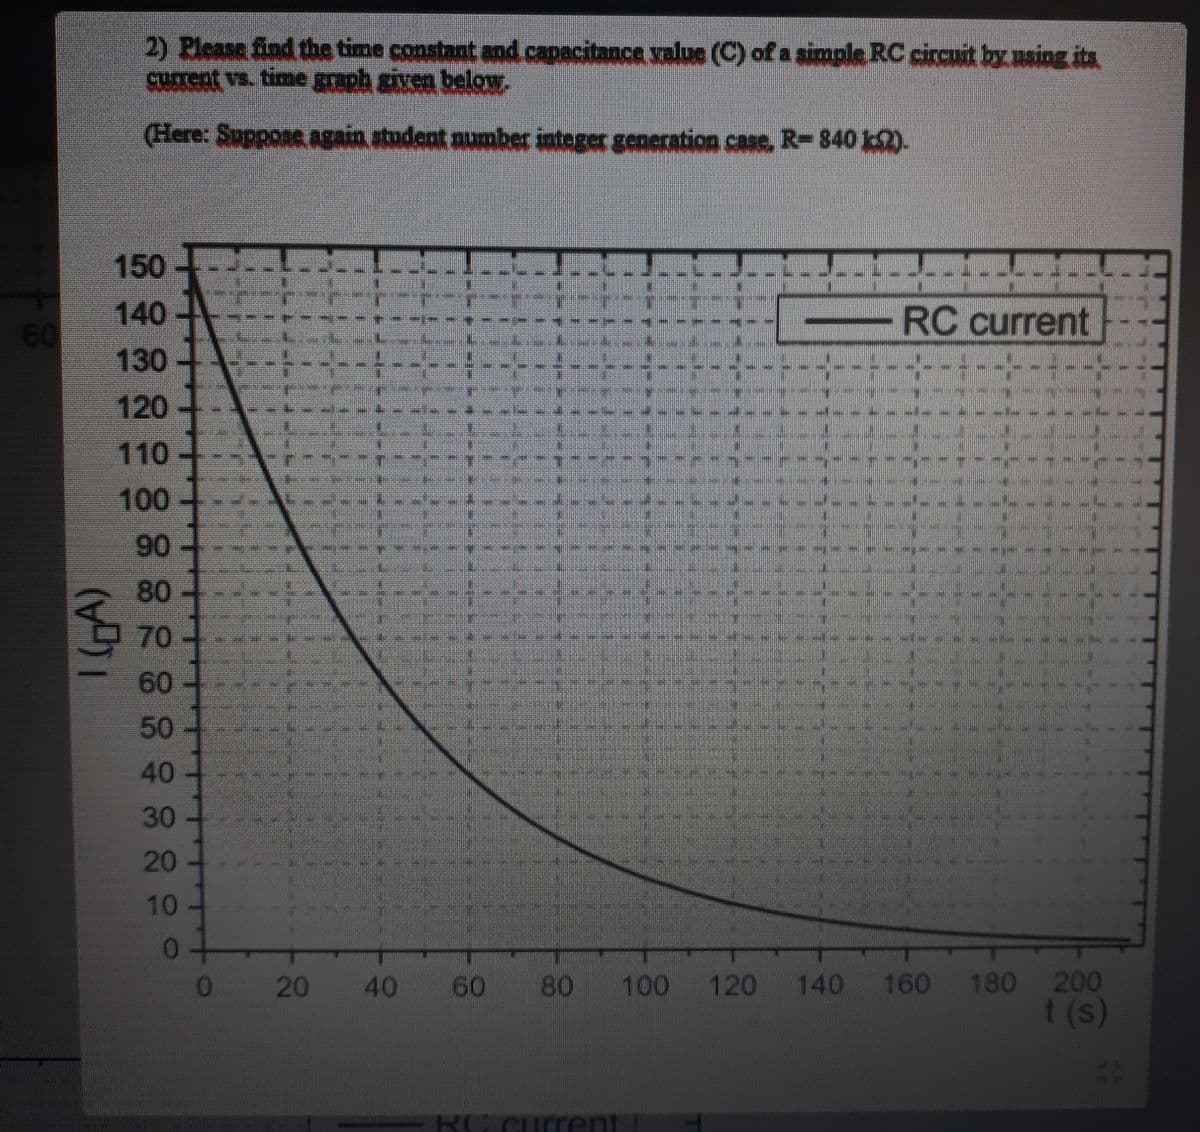 2) Please find the time constant and capacitance salue (C) of a simple RC circuit by using its
current vs. time graph given below.
(Here: Suppose, again student number integer generation case, R-840 k2).
150
HULL
140
60
130
RC current
120
110
100
90
80
70
60
50
40
30
20
10
180 200
t(s)
01
40 60 80
100
120
140 160
RC Current
20
